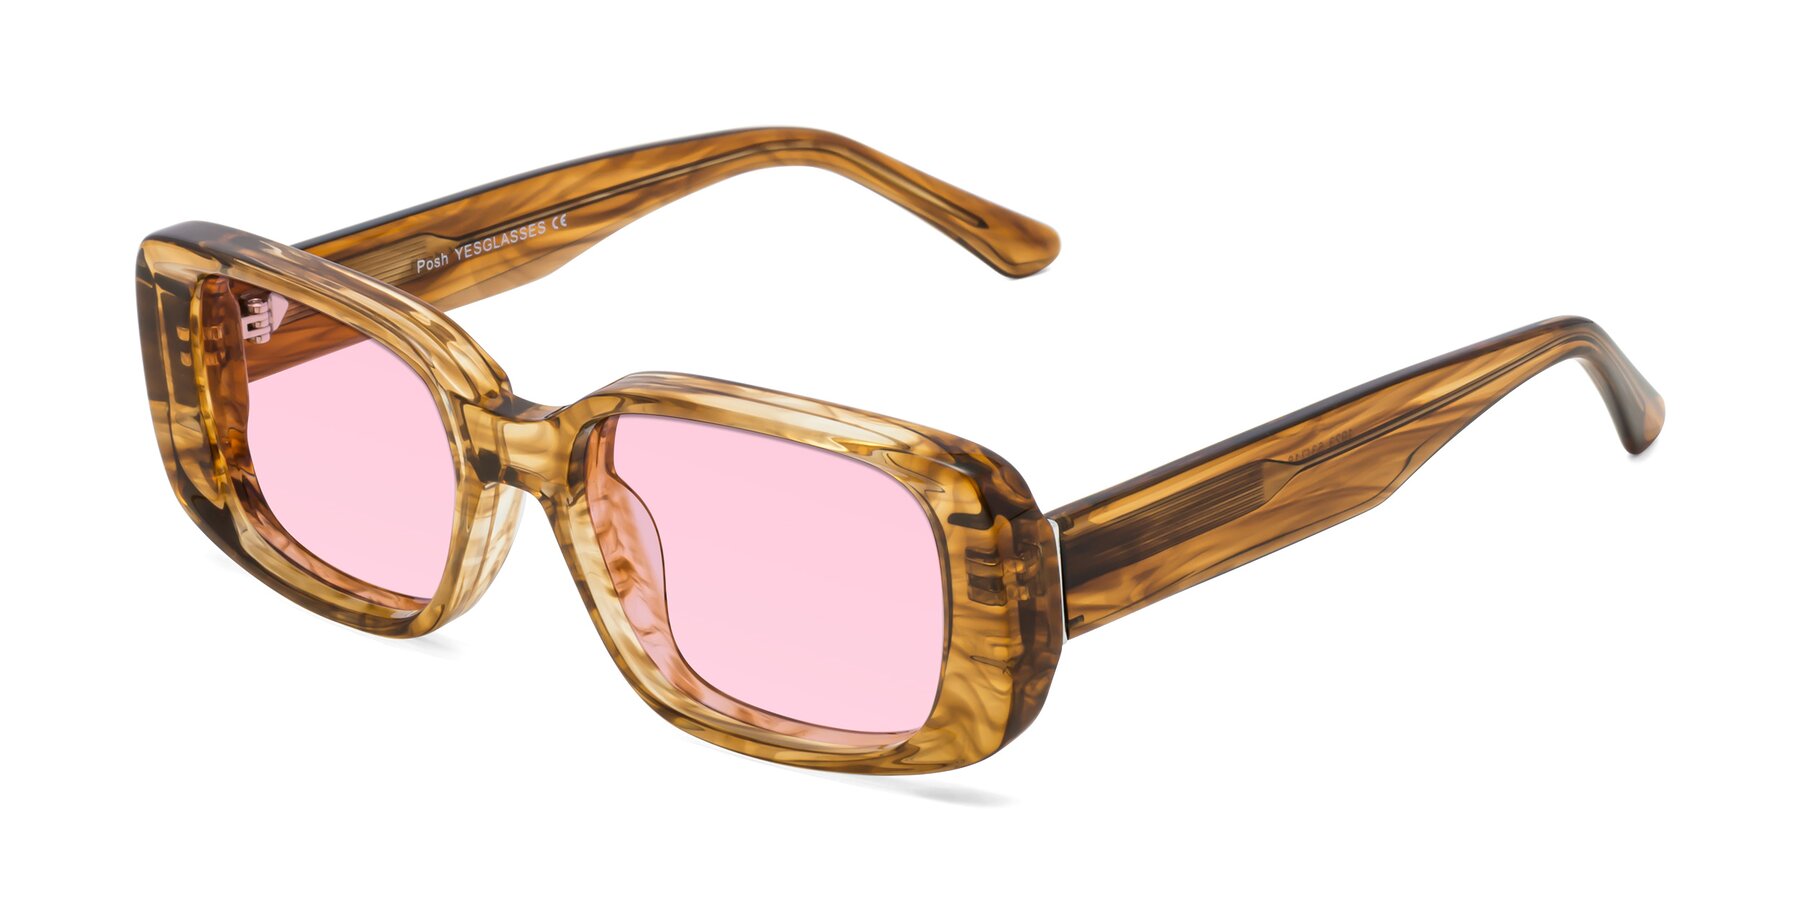 Angle of Posh in Stripe Amber with Light Pink Tinted Lenses